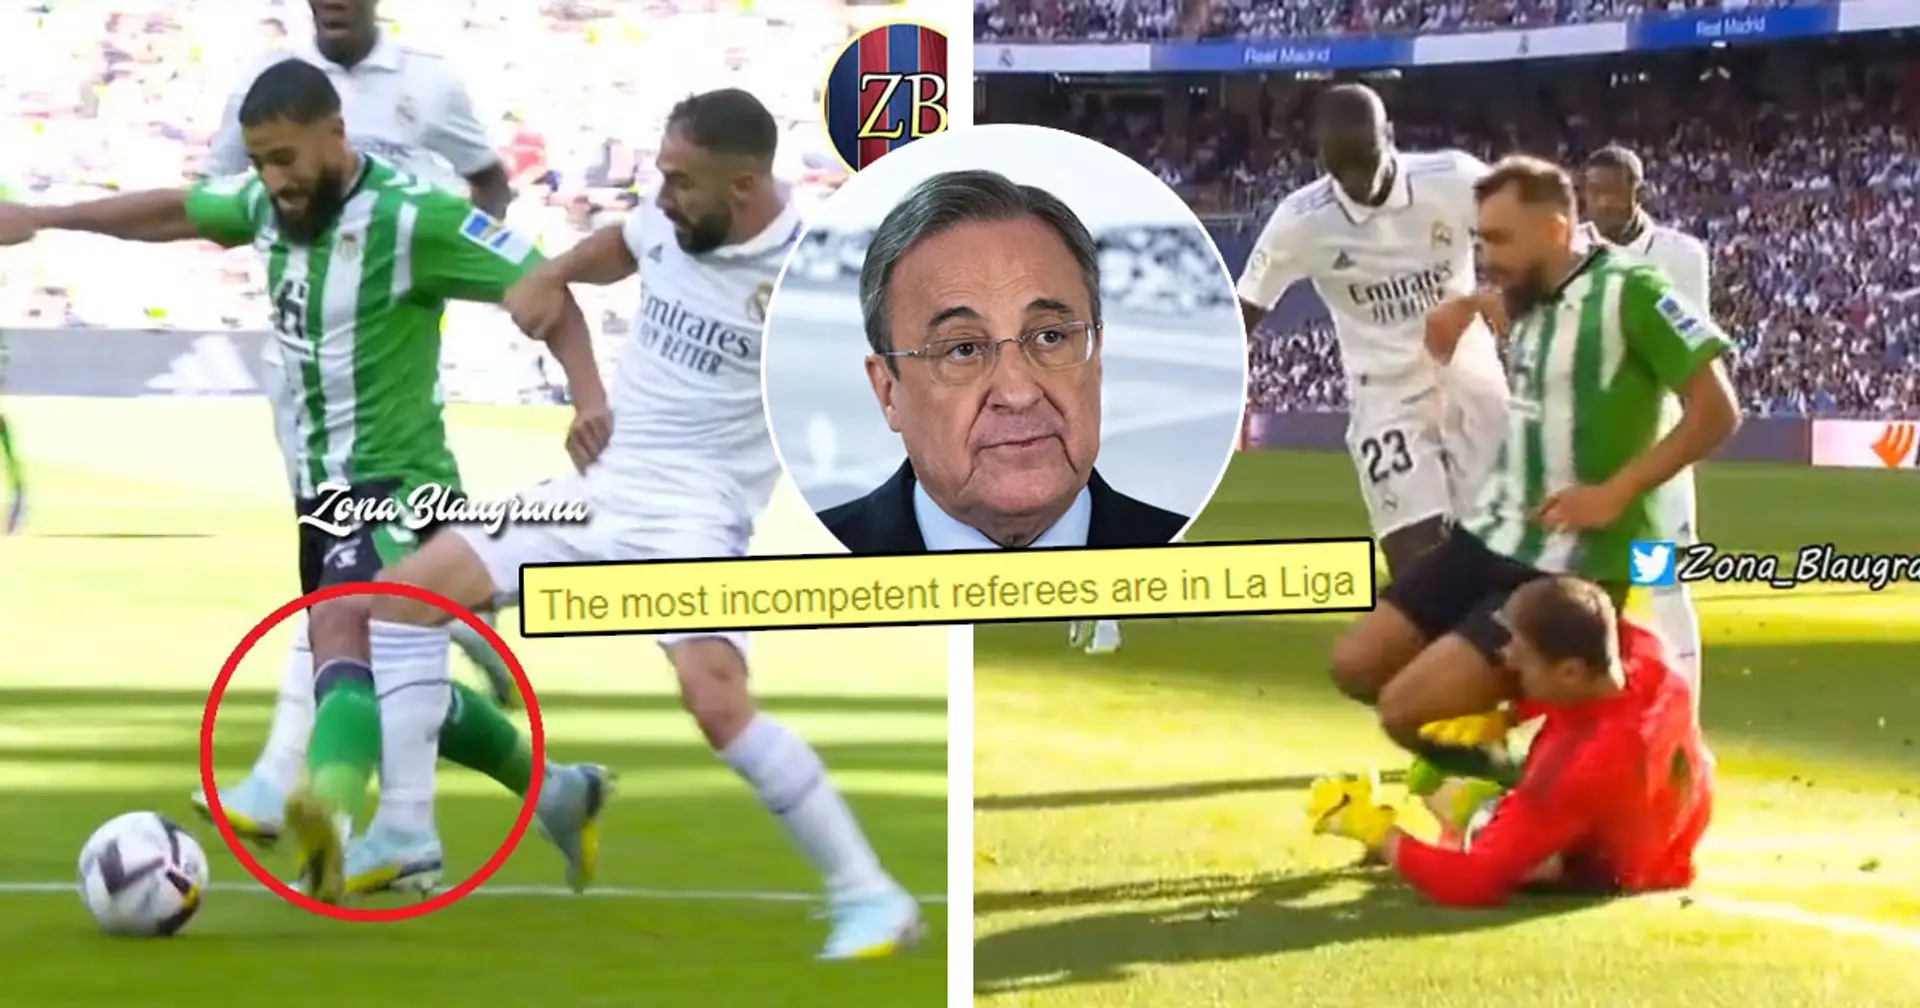 'Vardrid' trending on Twitter after referee ignores 2 potential penalties in Real Madrid game